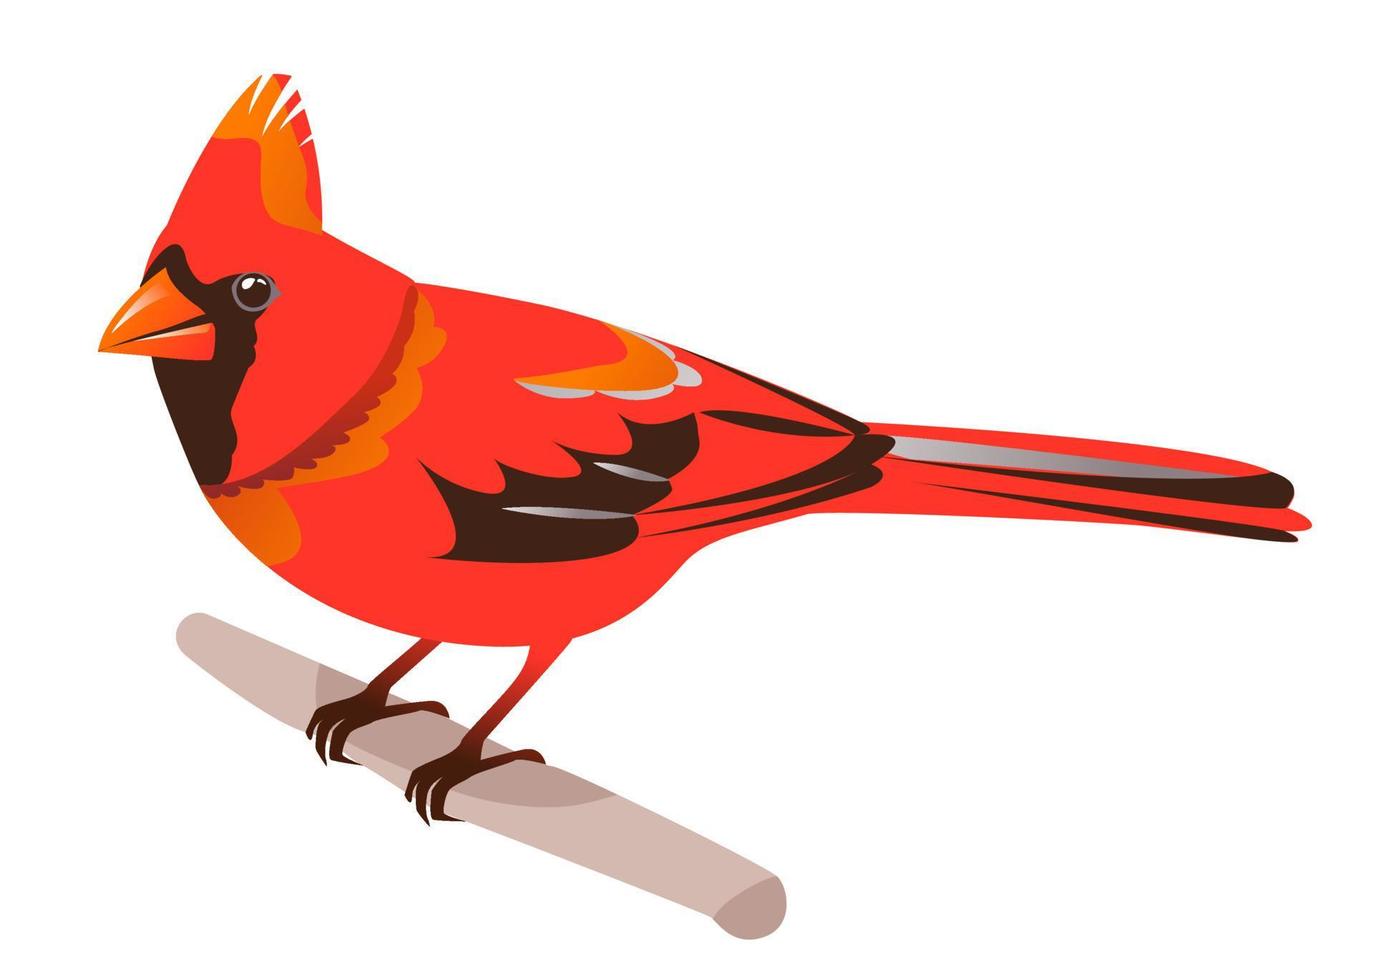 Northern Cardinal. A red bird is sitting on a branch. Cartoon vector illustration on a white background